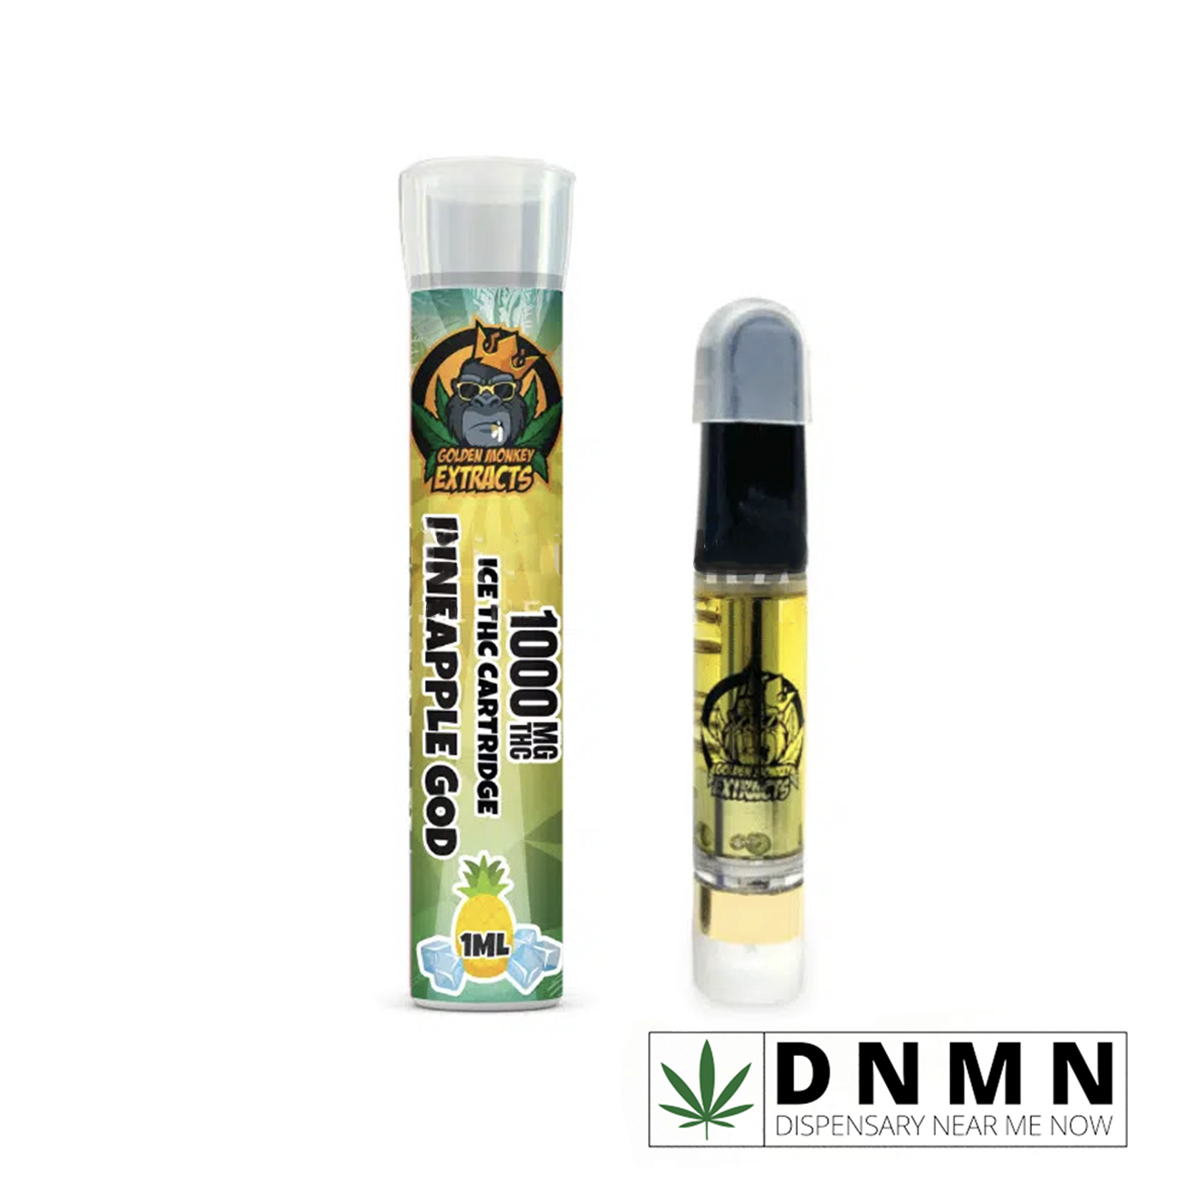 Golden Monkey Extracts - ICED Pineapple God Cartridge | Buy Vapes Online | Dispensary Near Me